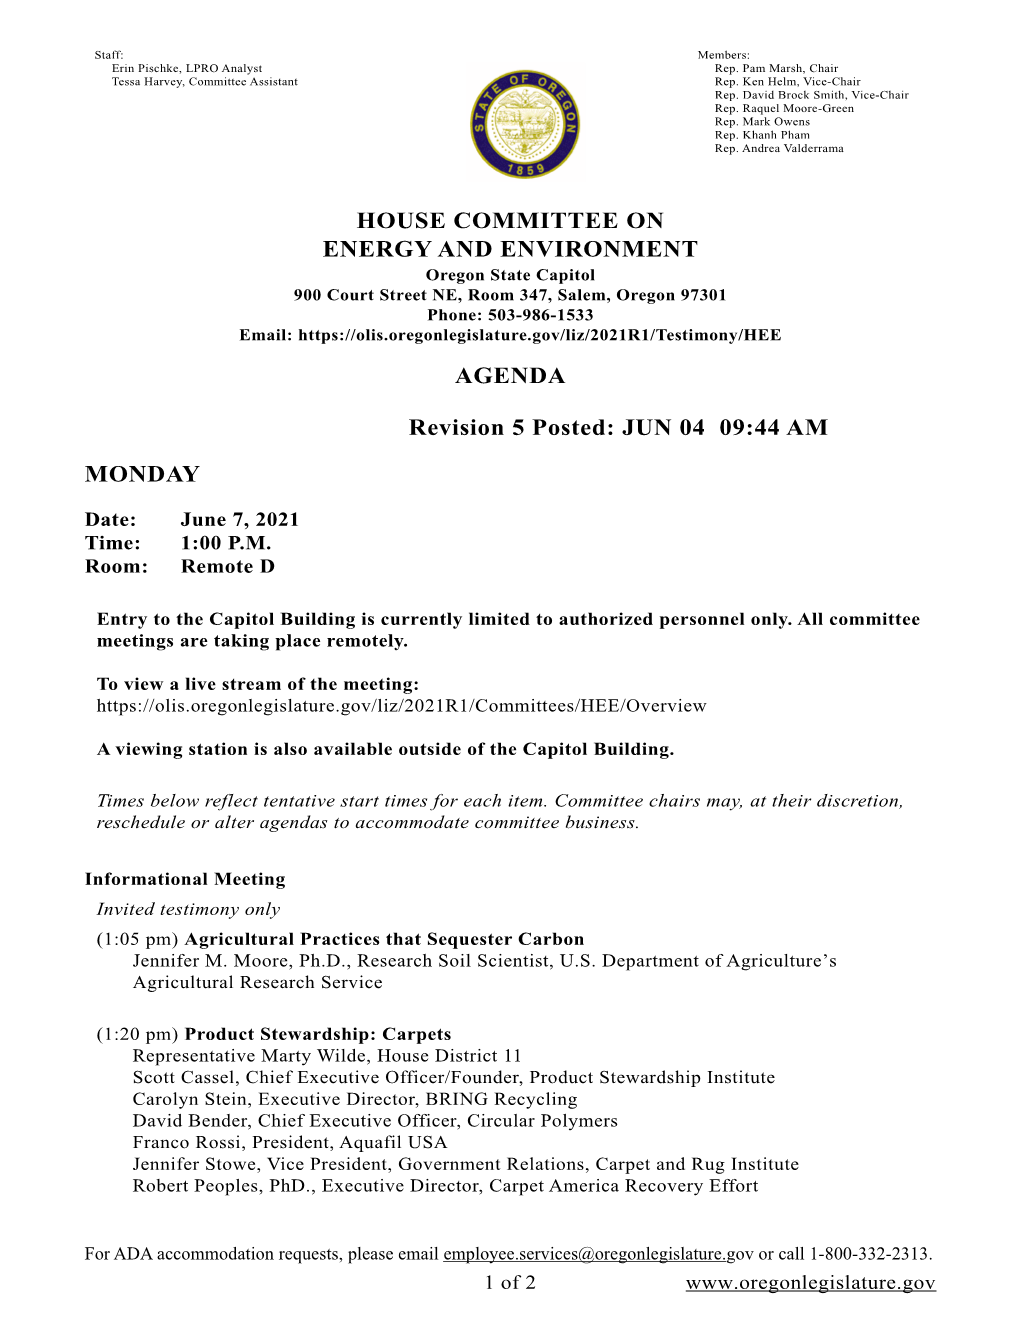 House Committee on Energy and Environment Agenda